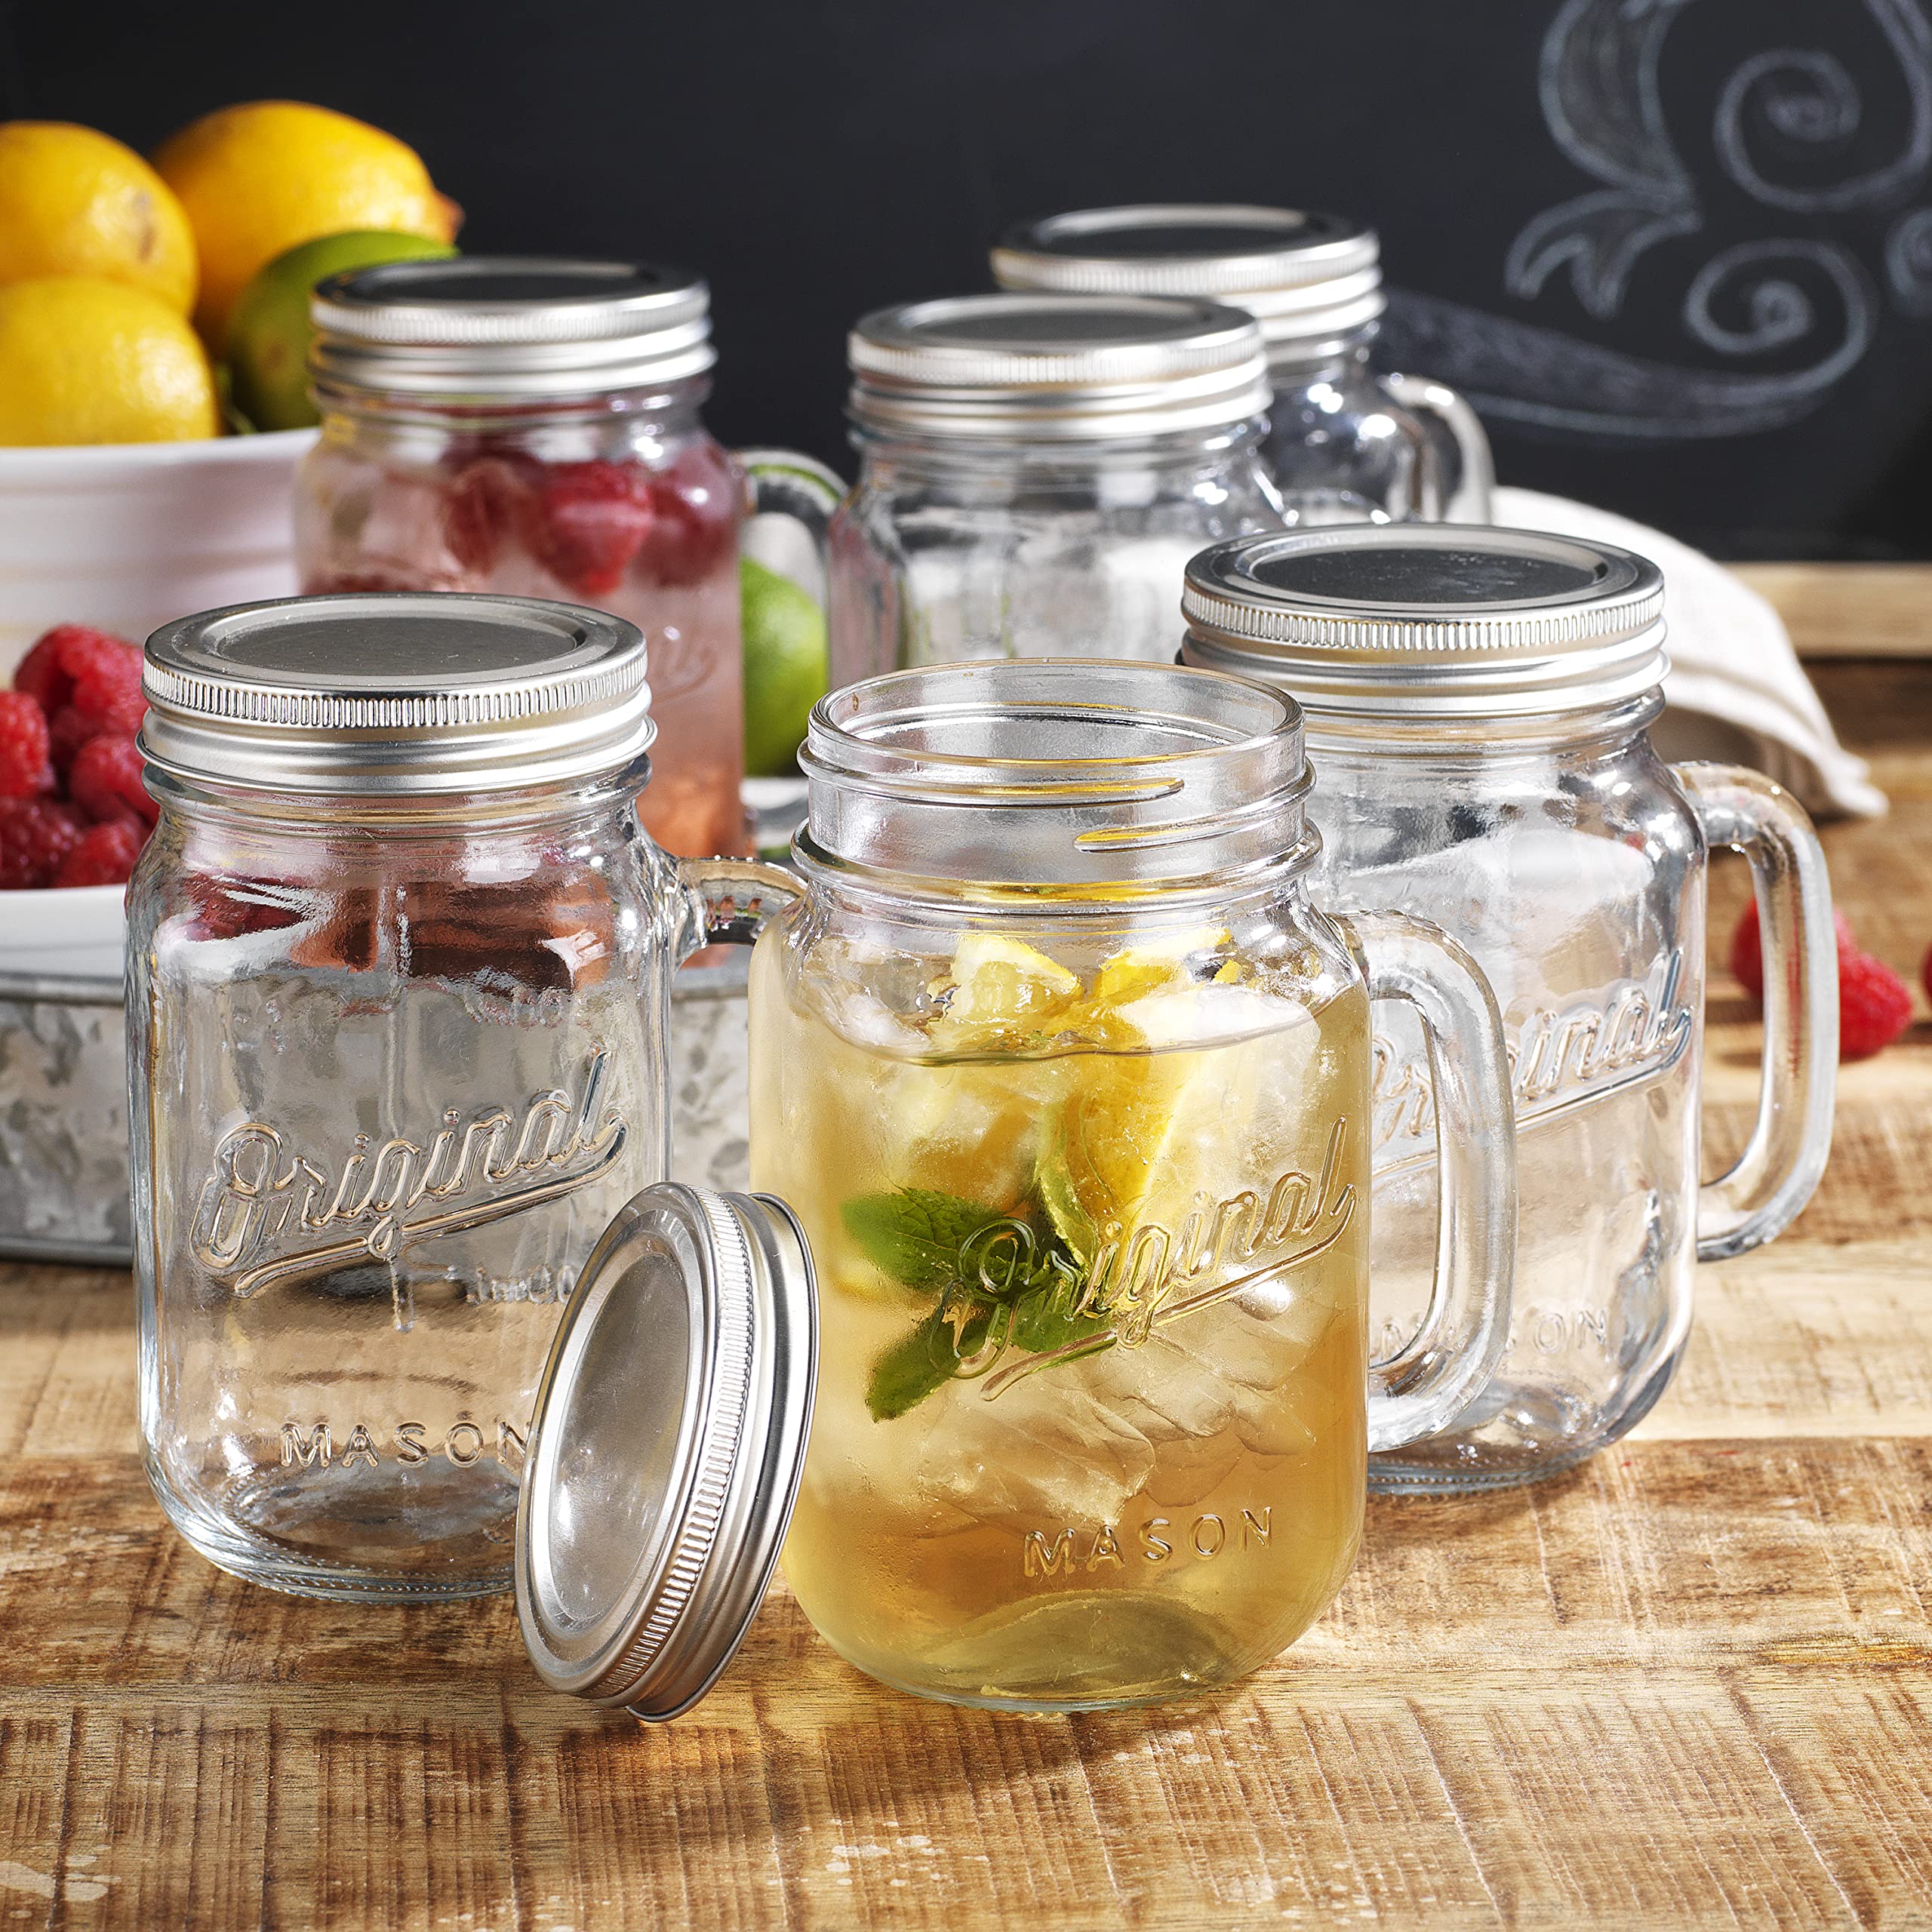 Glaver's Mason Jar 16 Oz. Glass Mugs with Handle and Lid Set Of 6 Old Fashioned Drinking Glass Bottles Original Mason Jar Pint Sized Cup Set.  - Acceptable